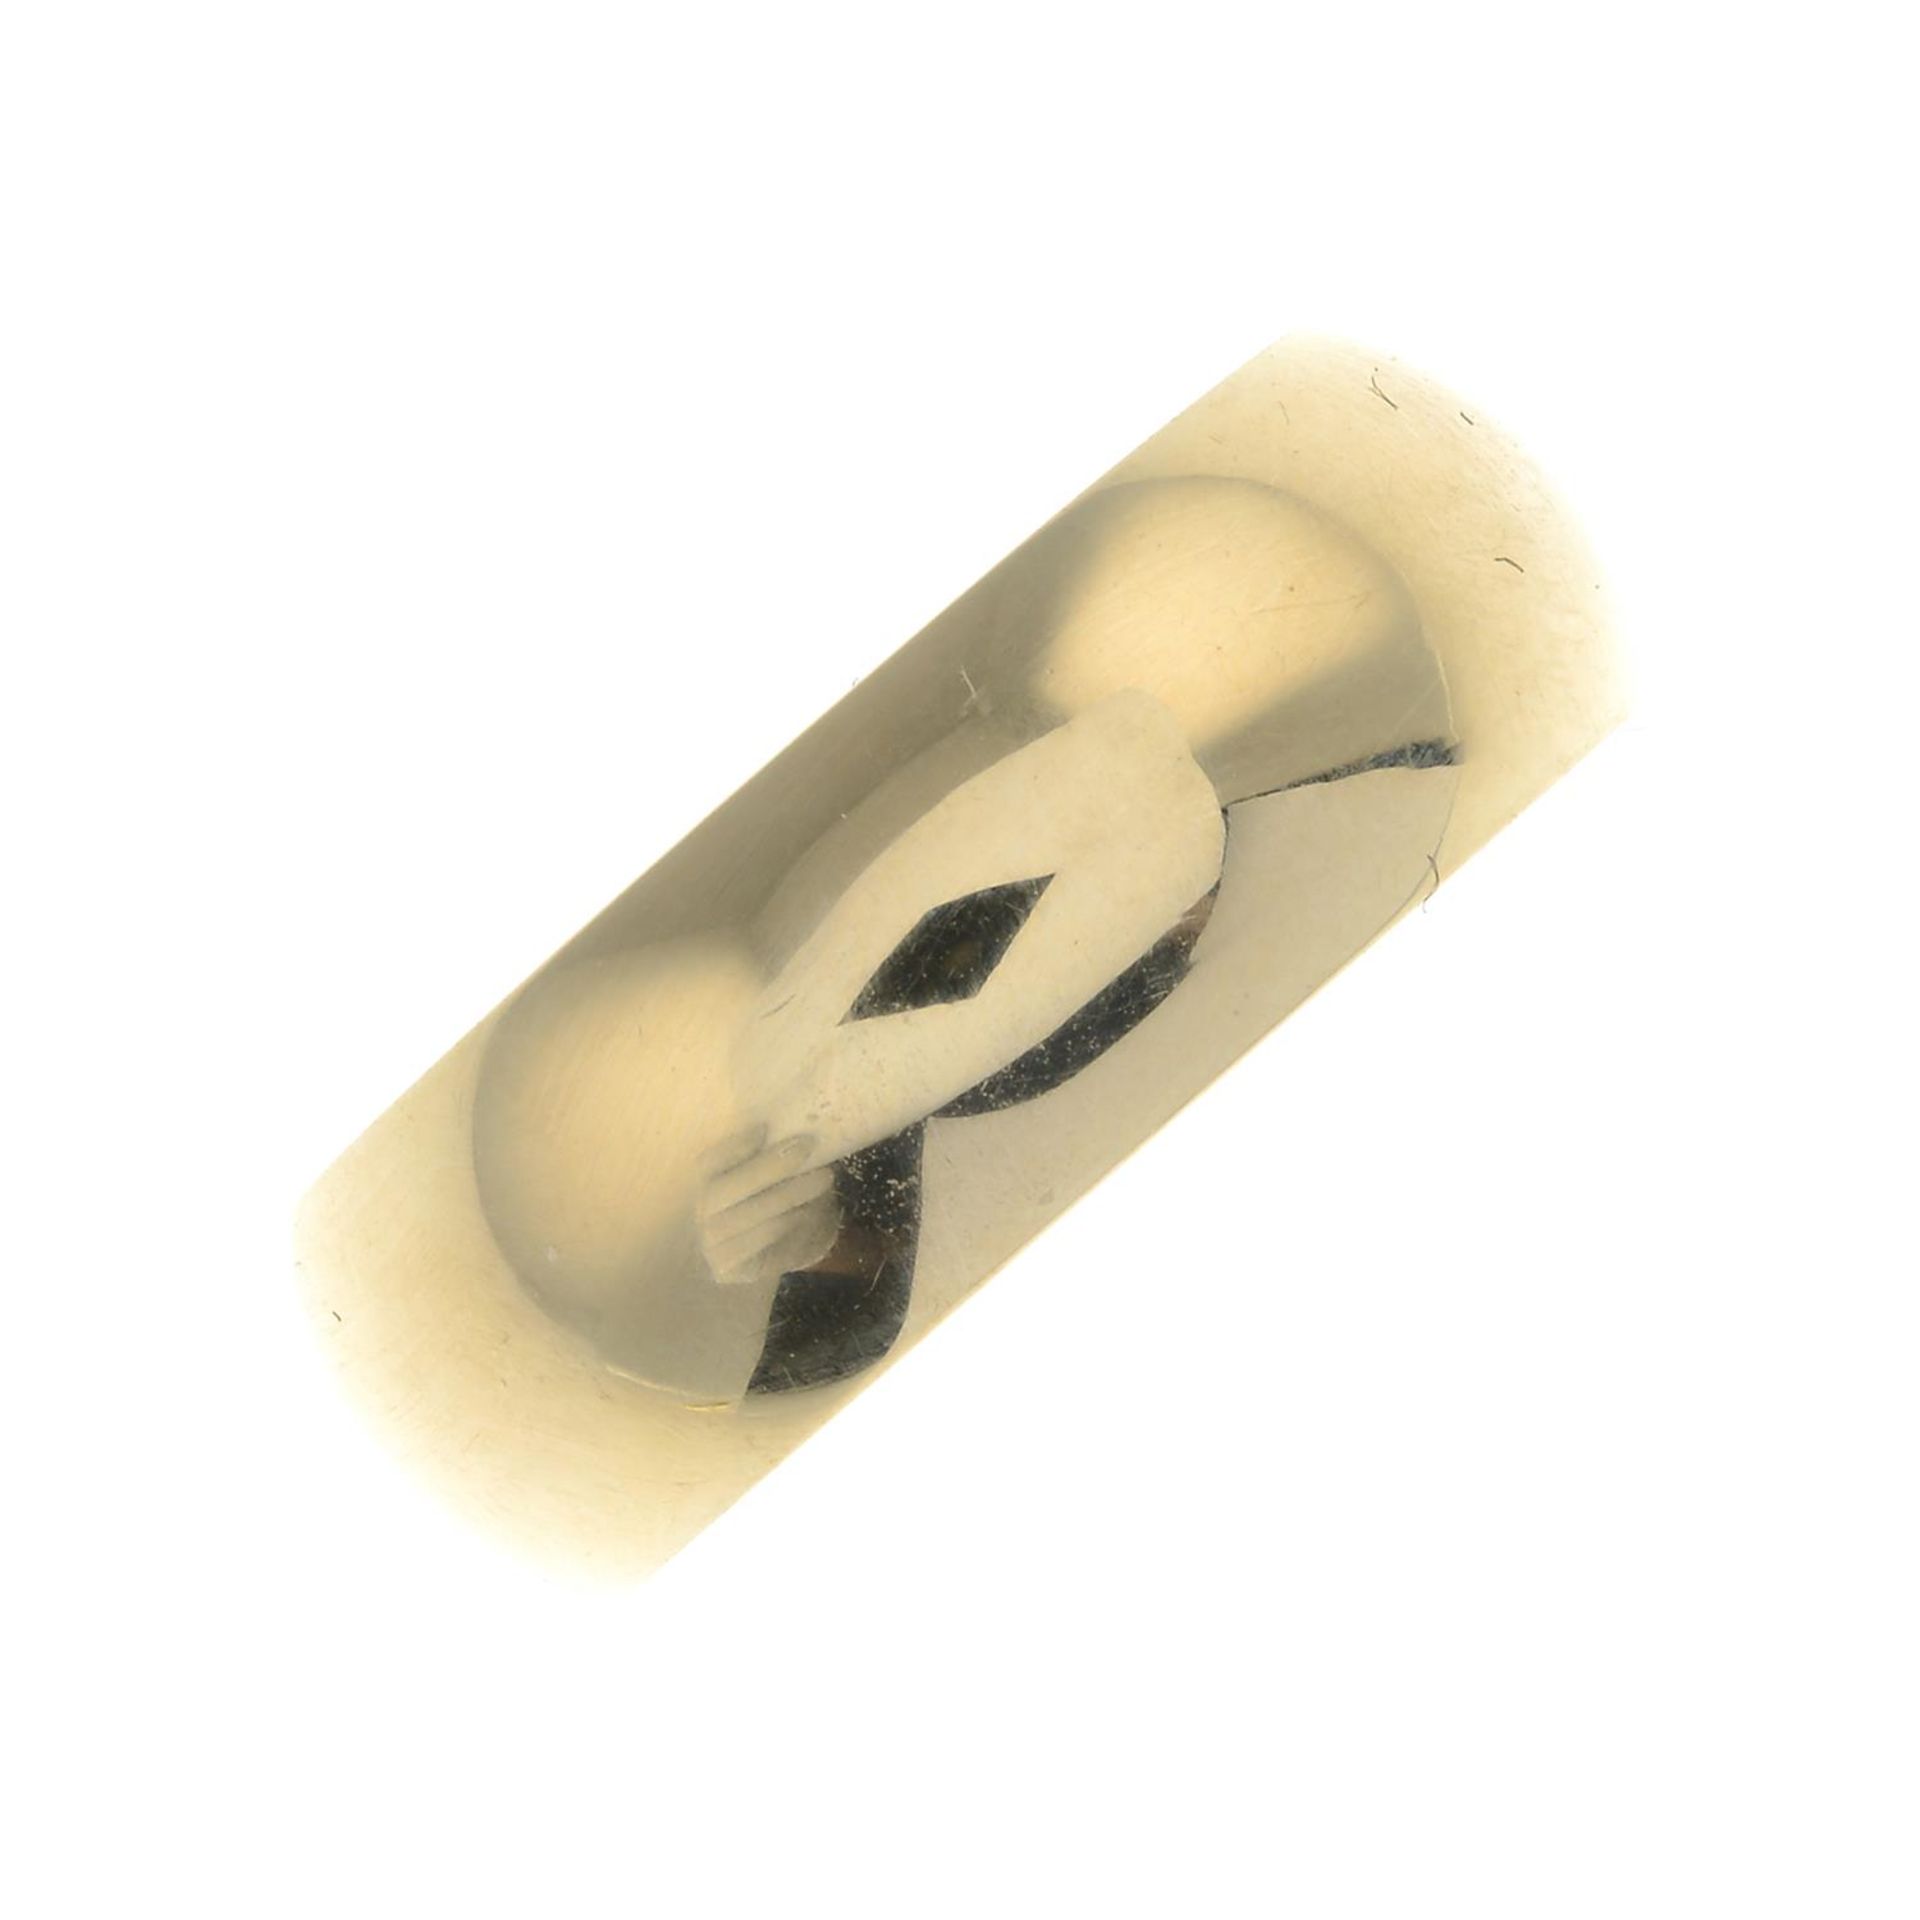 A 9ct gold band ring.Hallmarks for 9ct gold.